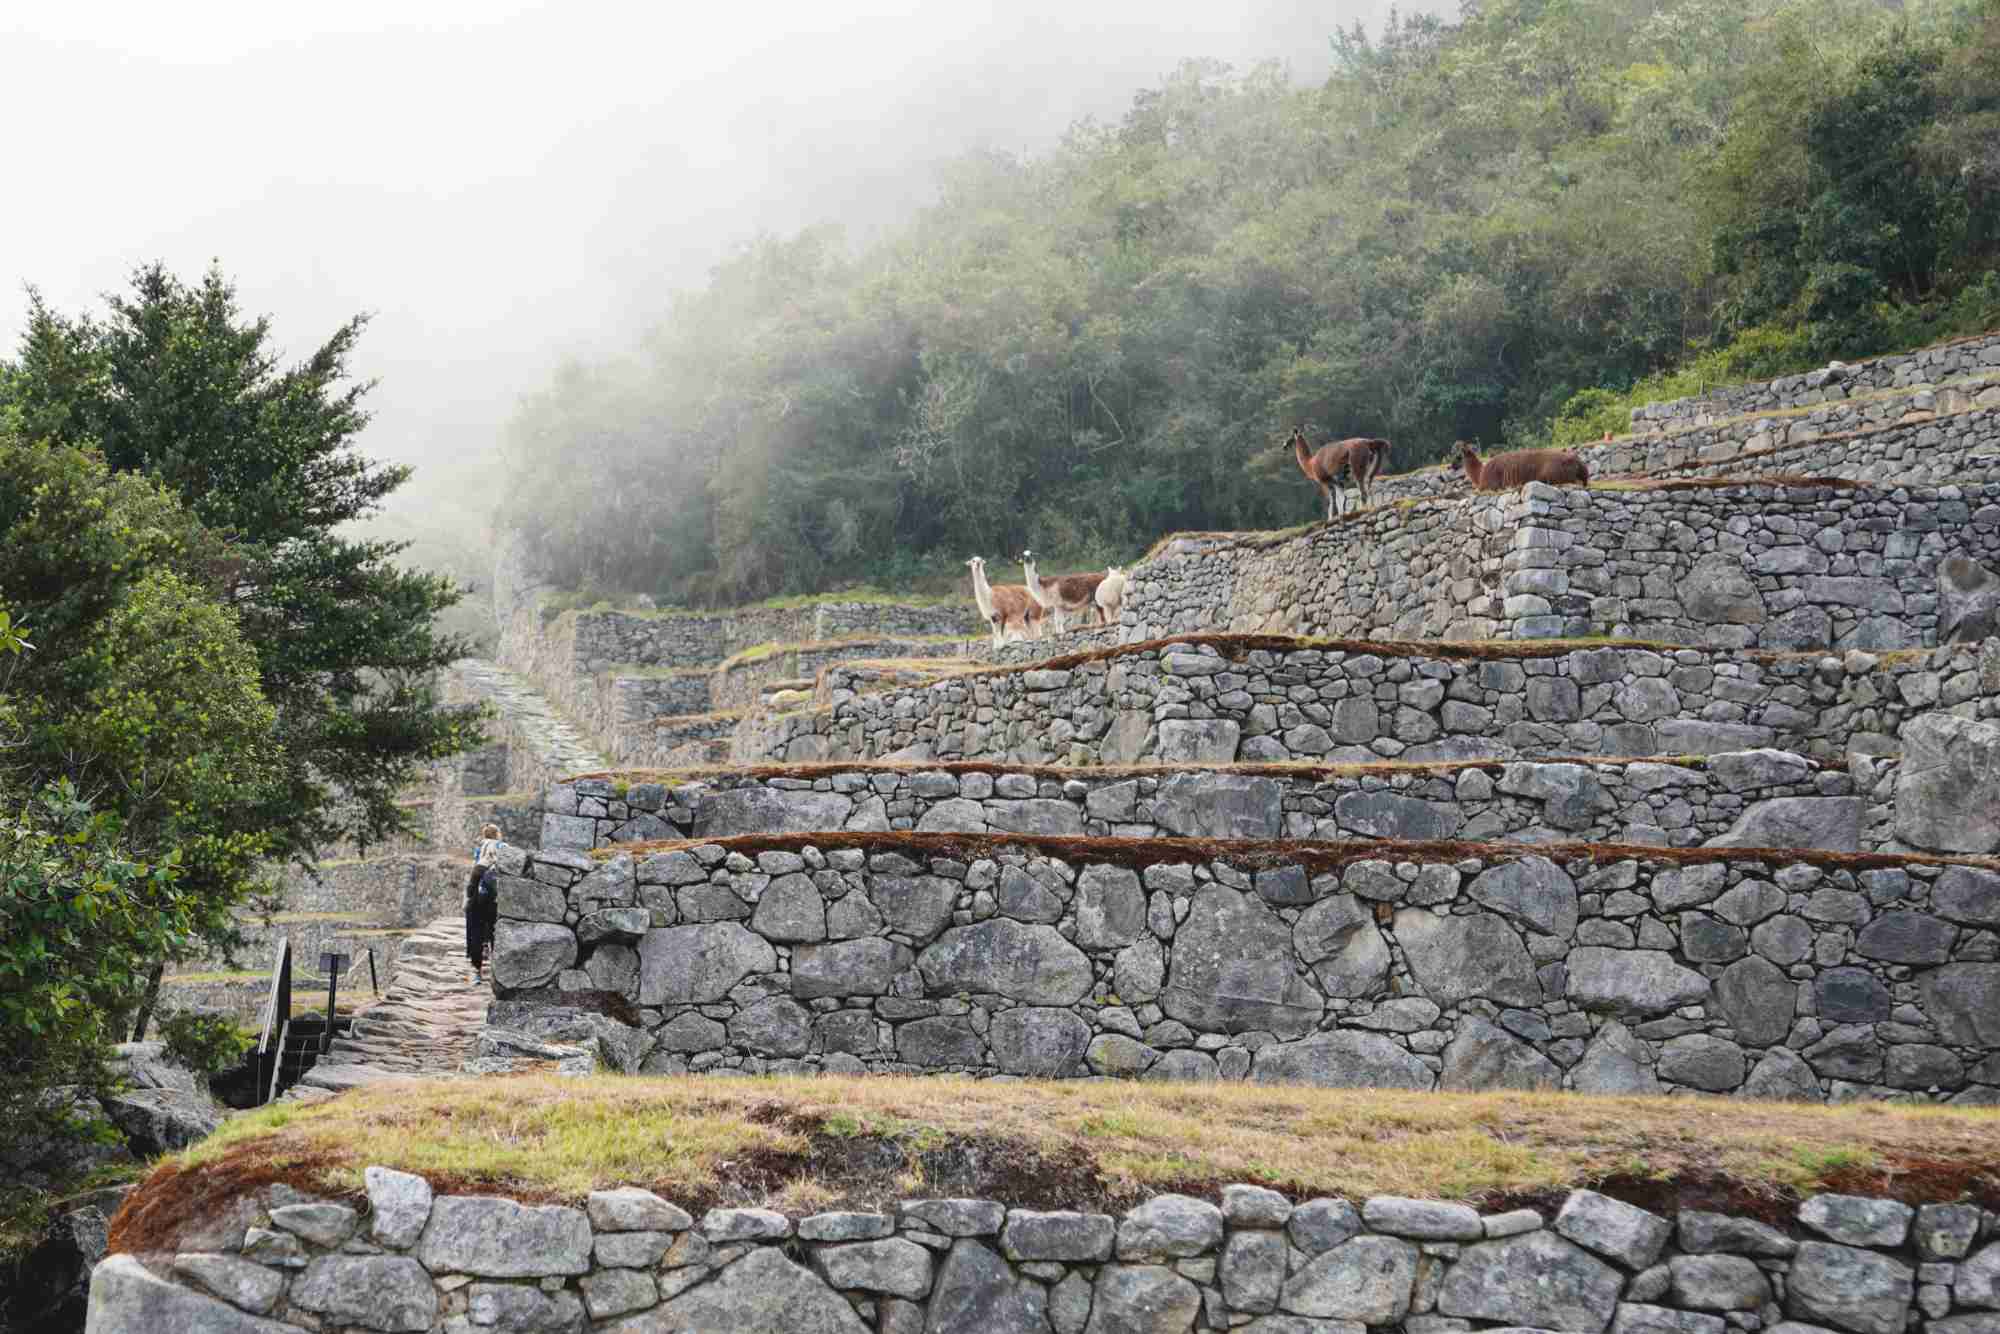 The Top 15 Things to Do in Machu Picchu